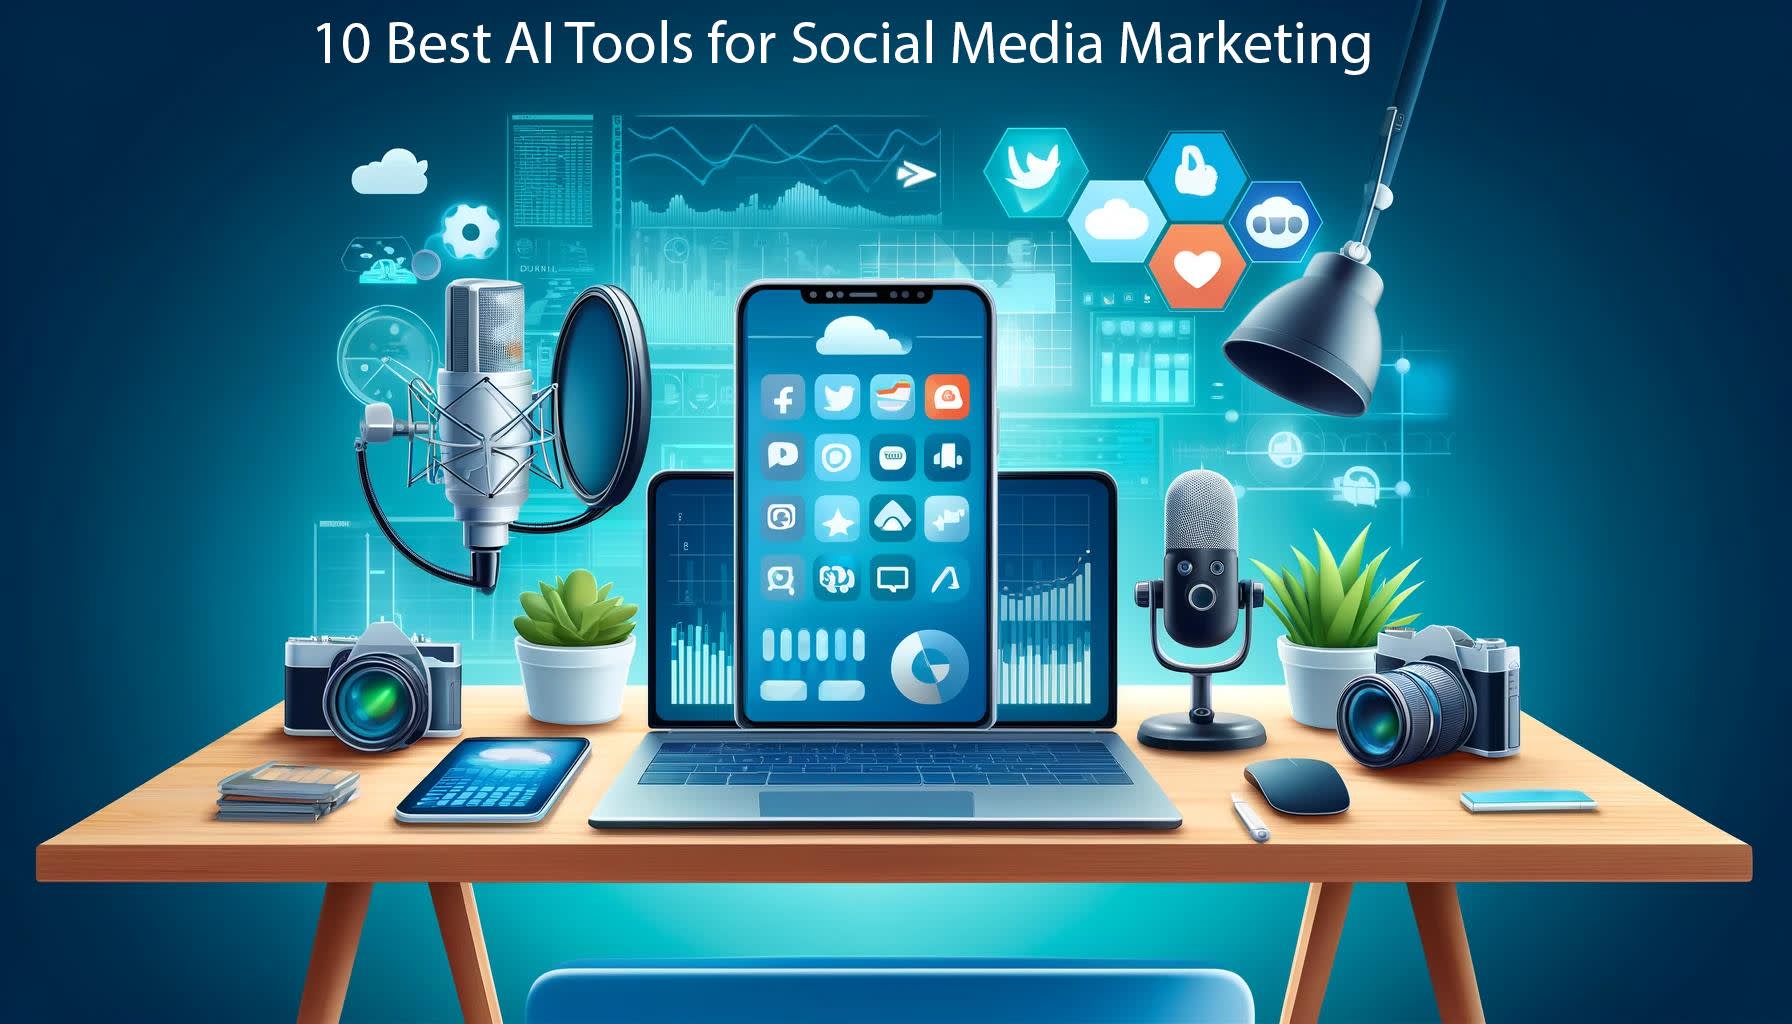 10 Best AI Tools for Social Media Marketing Other than ChatGPT